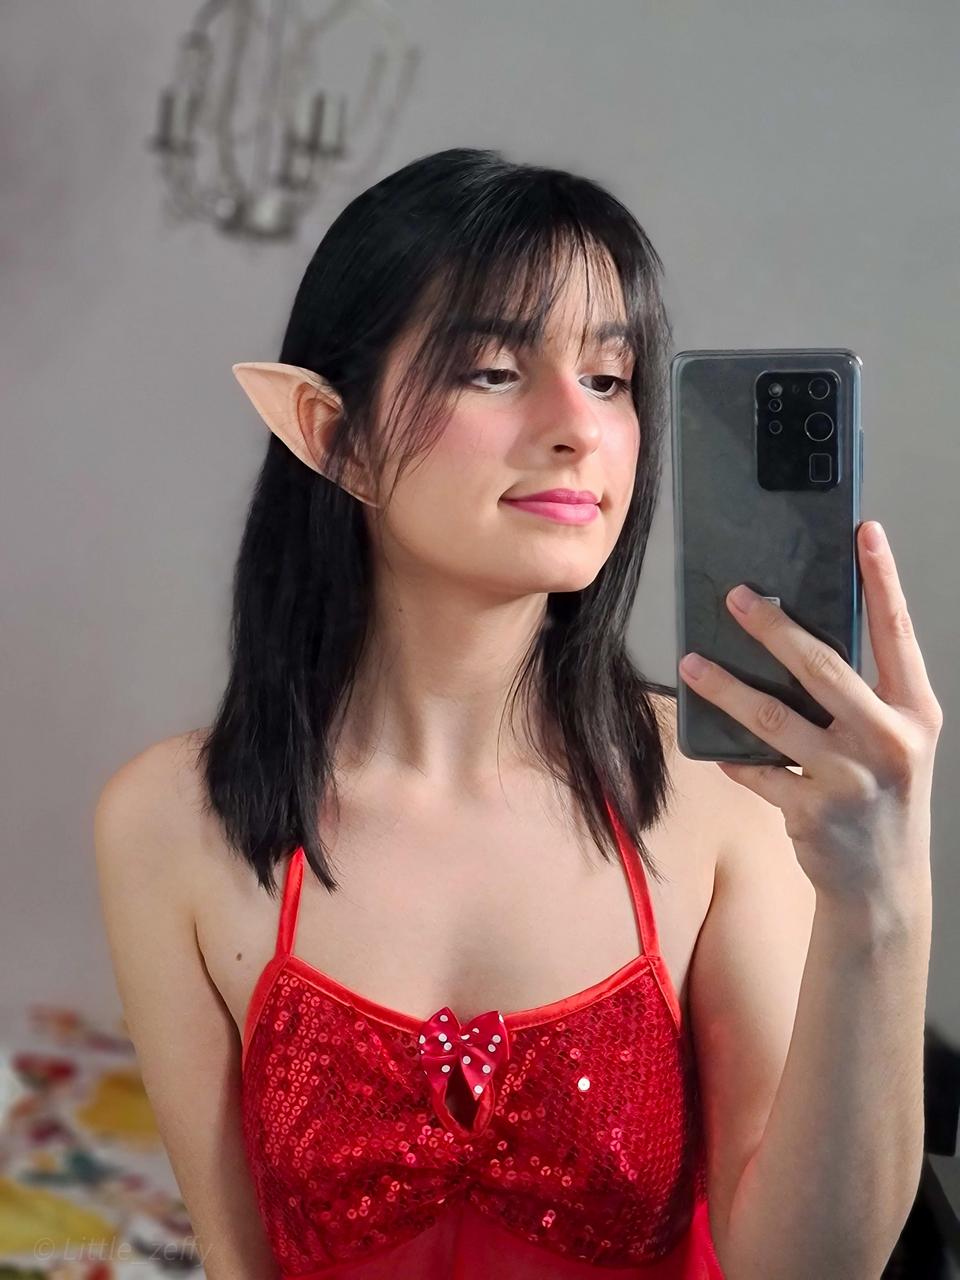 I Have Made A Little Elf Cosplay The Next One Will Be Better I Accept Recommendation